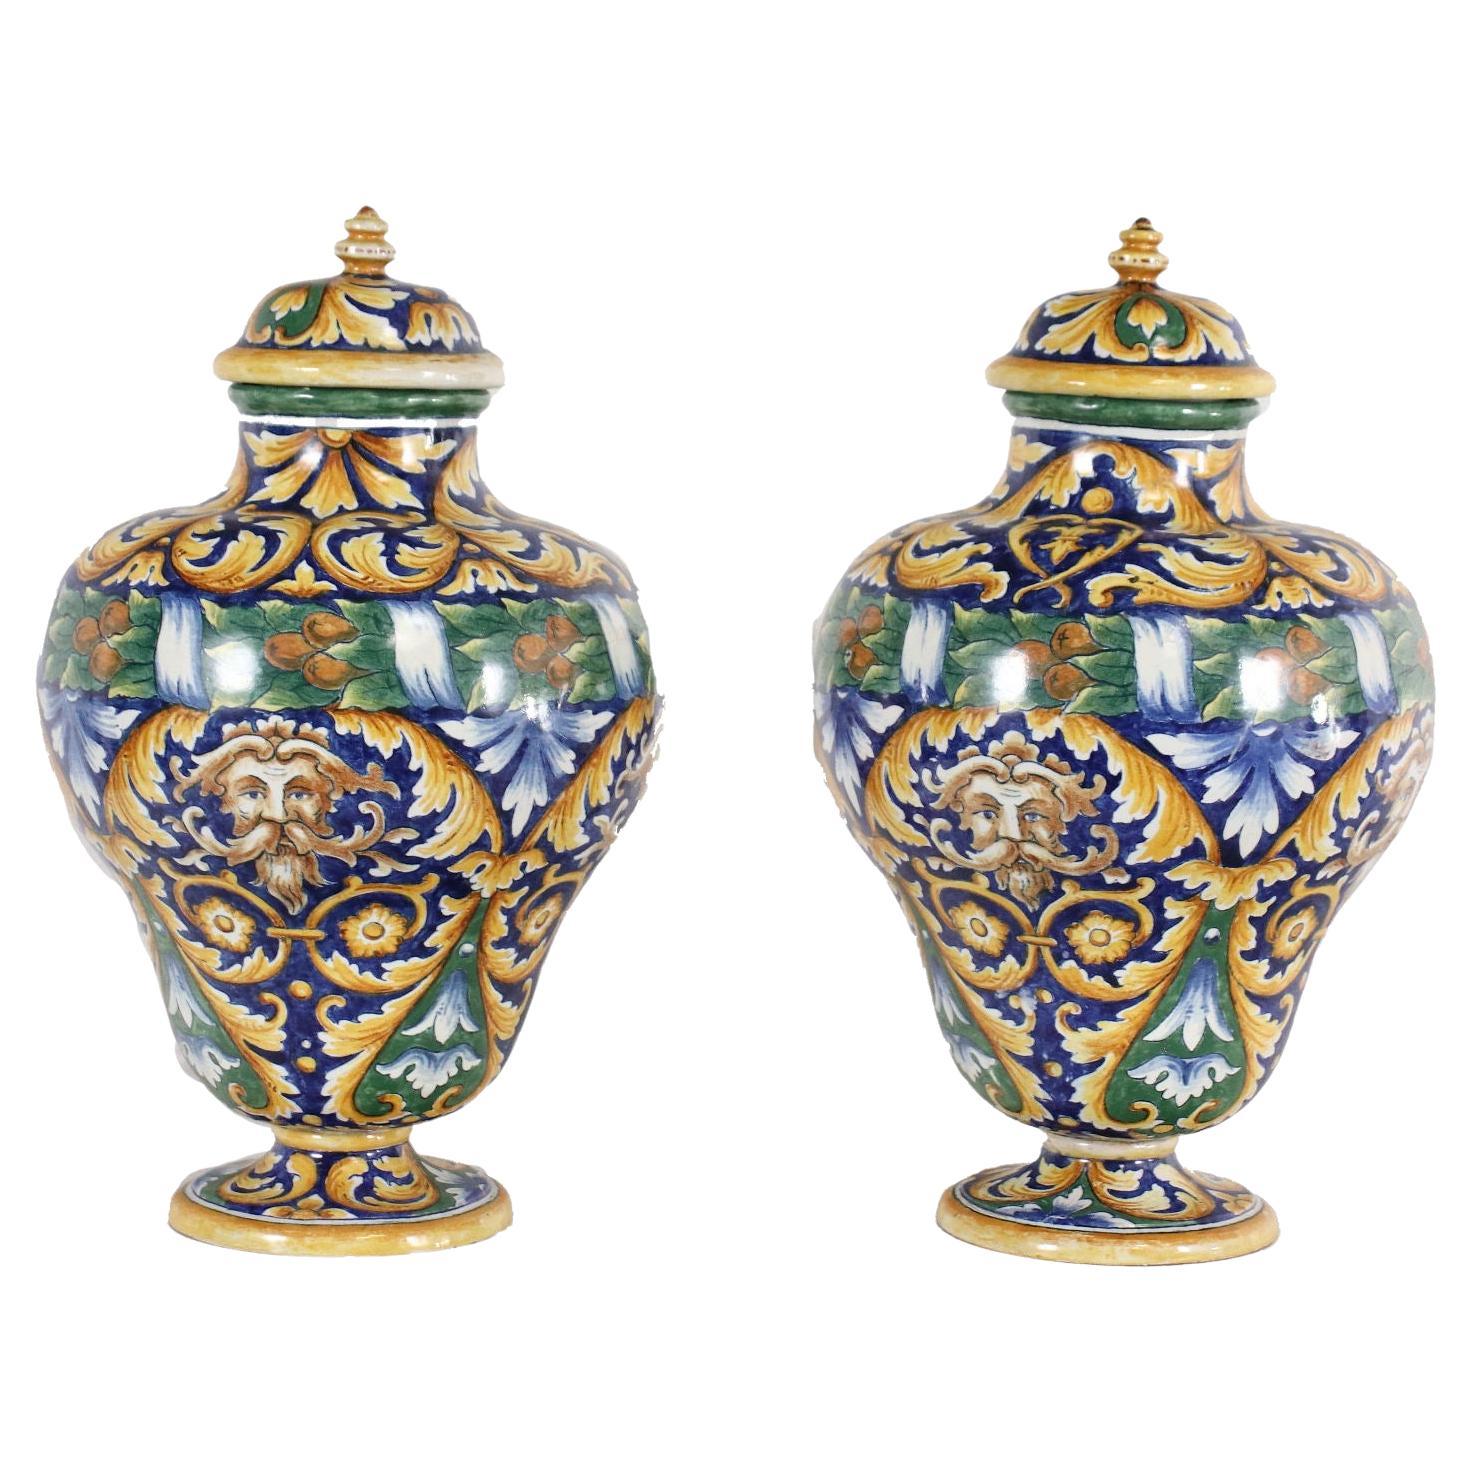 Pair of Vases with Lids